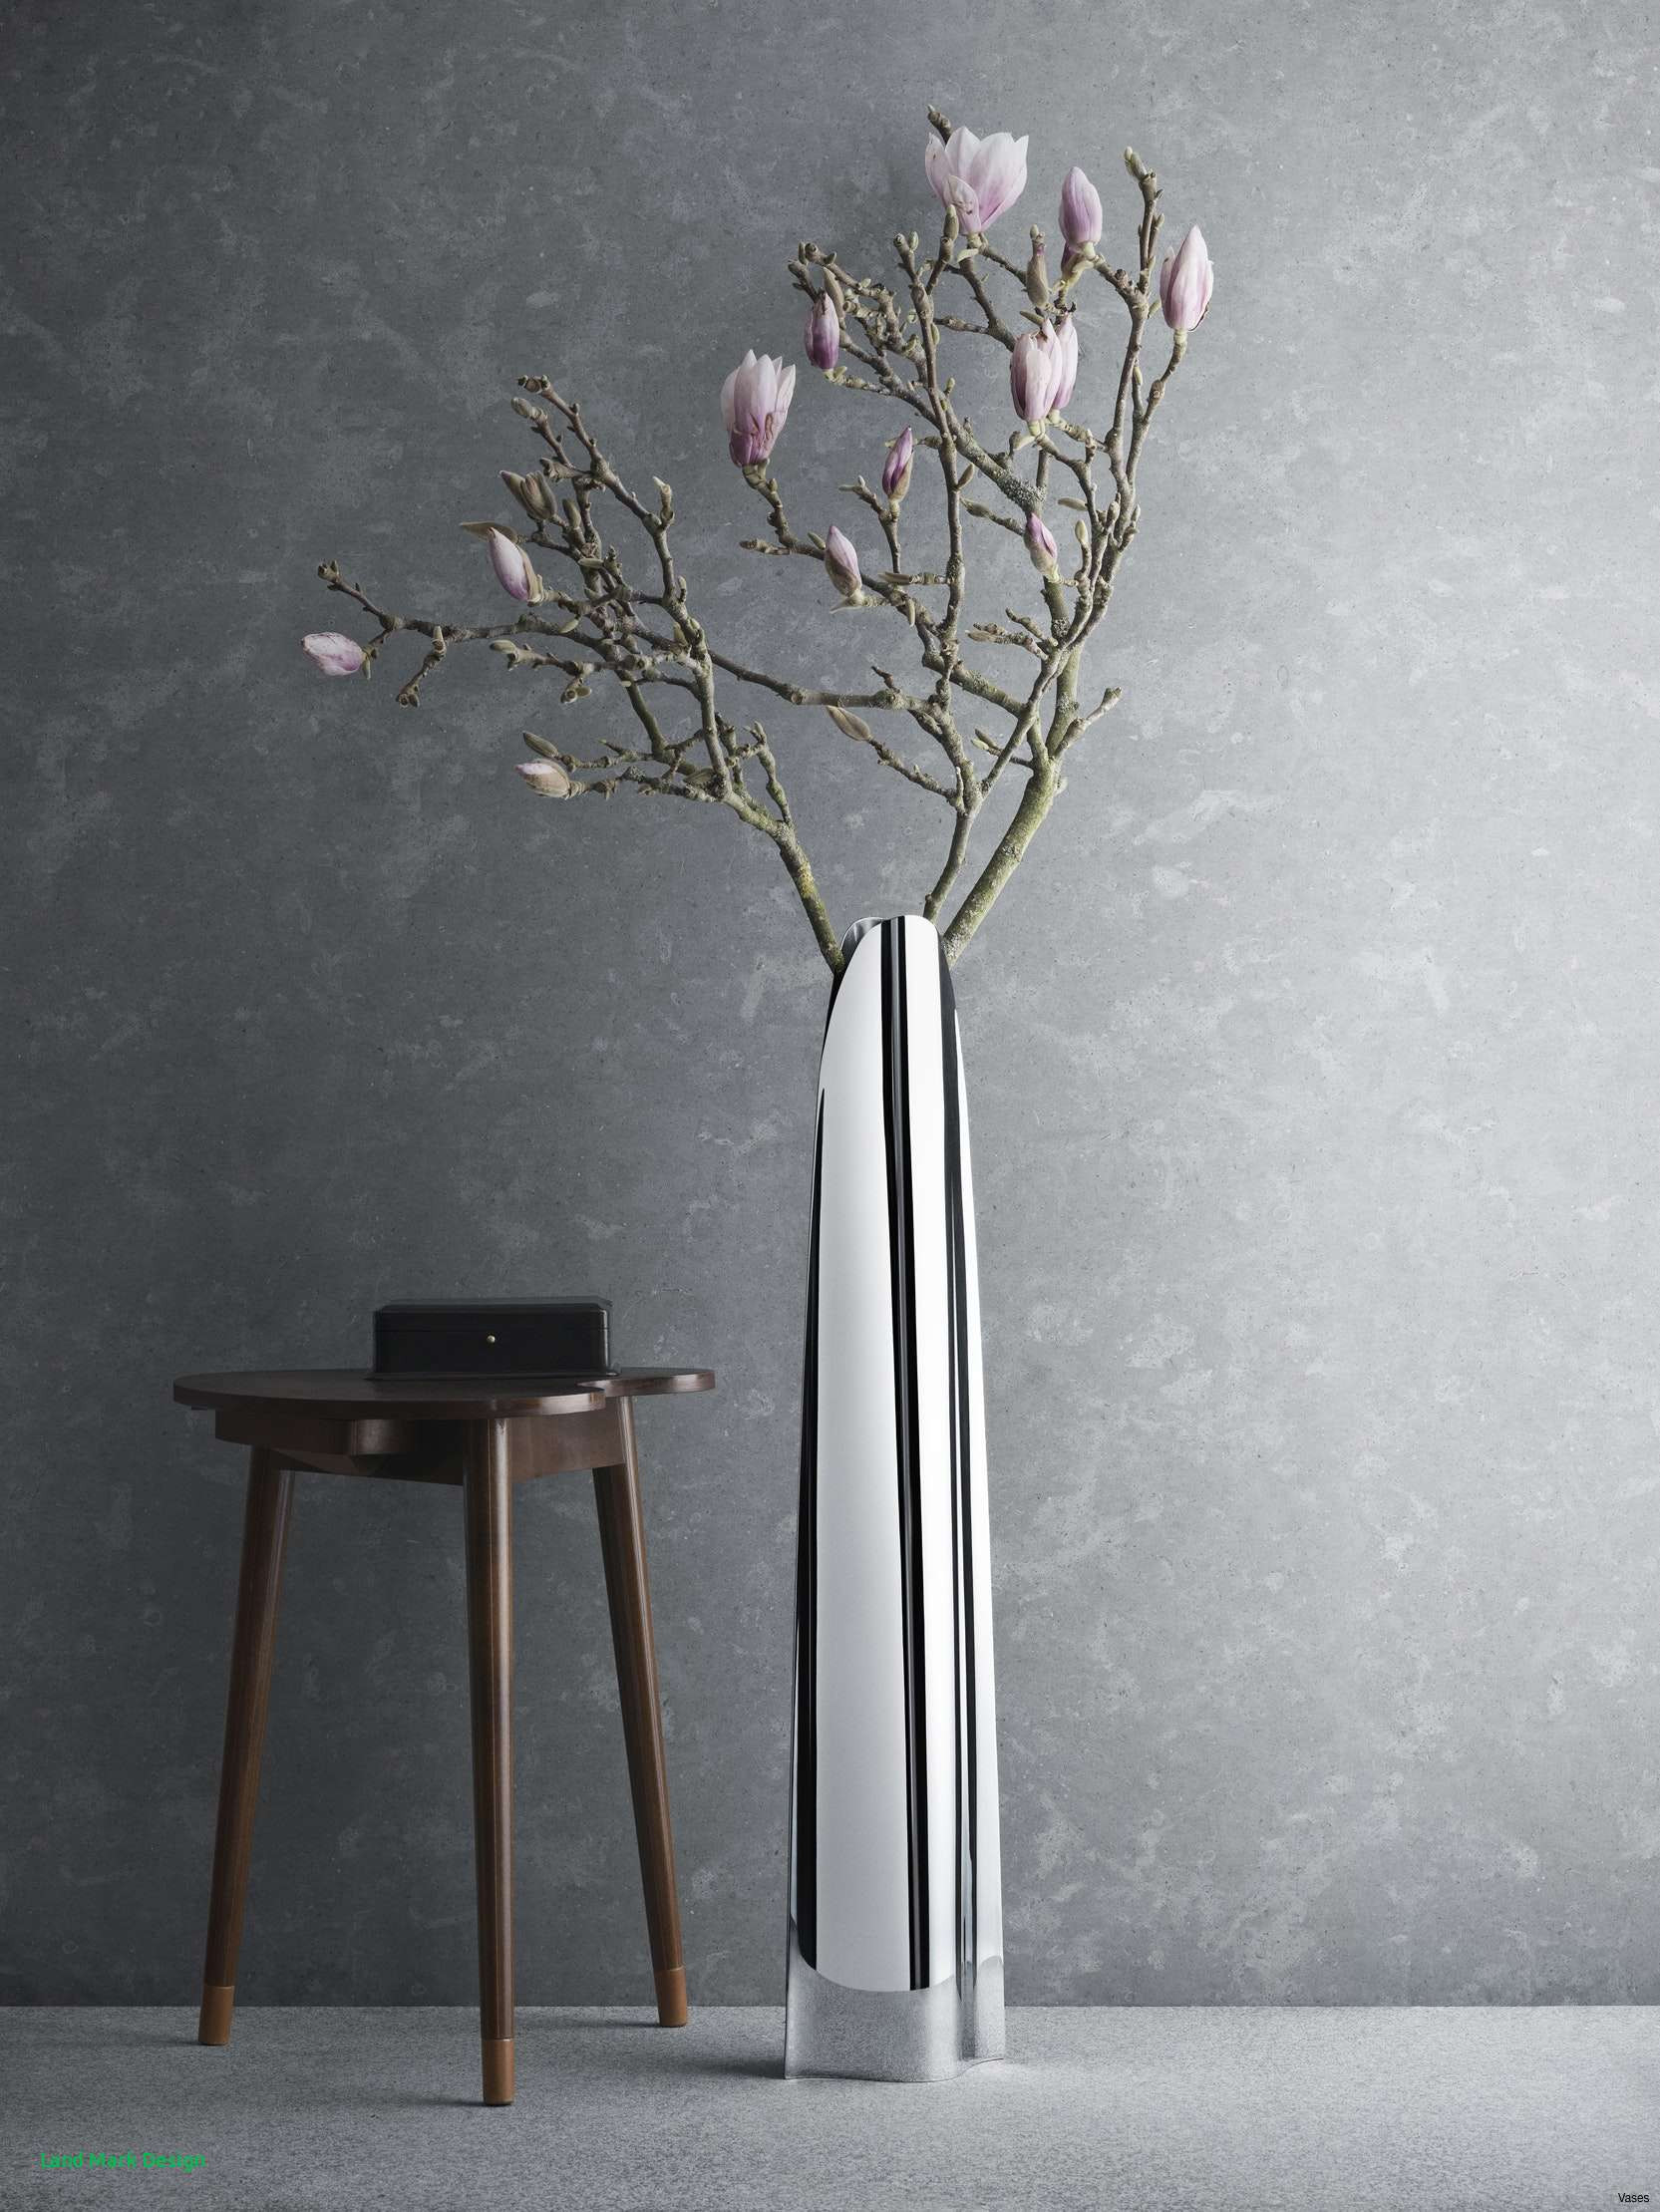 12 Popular where to Buy Silver Vase orchids 2024 free download where to buy silver vase orchids of white and silver vase gallery modern floor vase vases artificial with modern floor vase lovely cheap